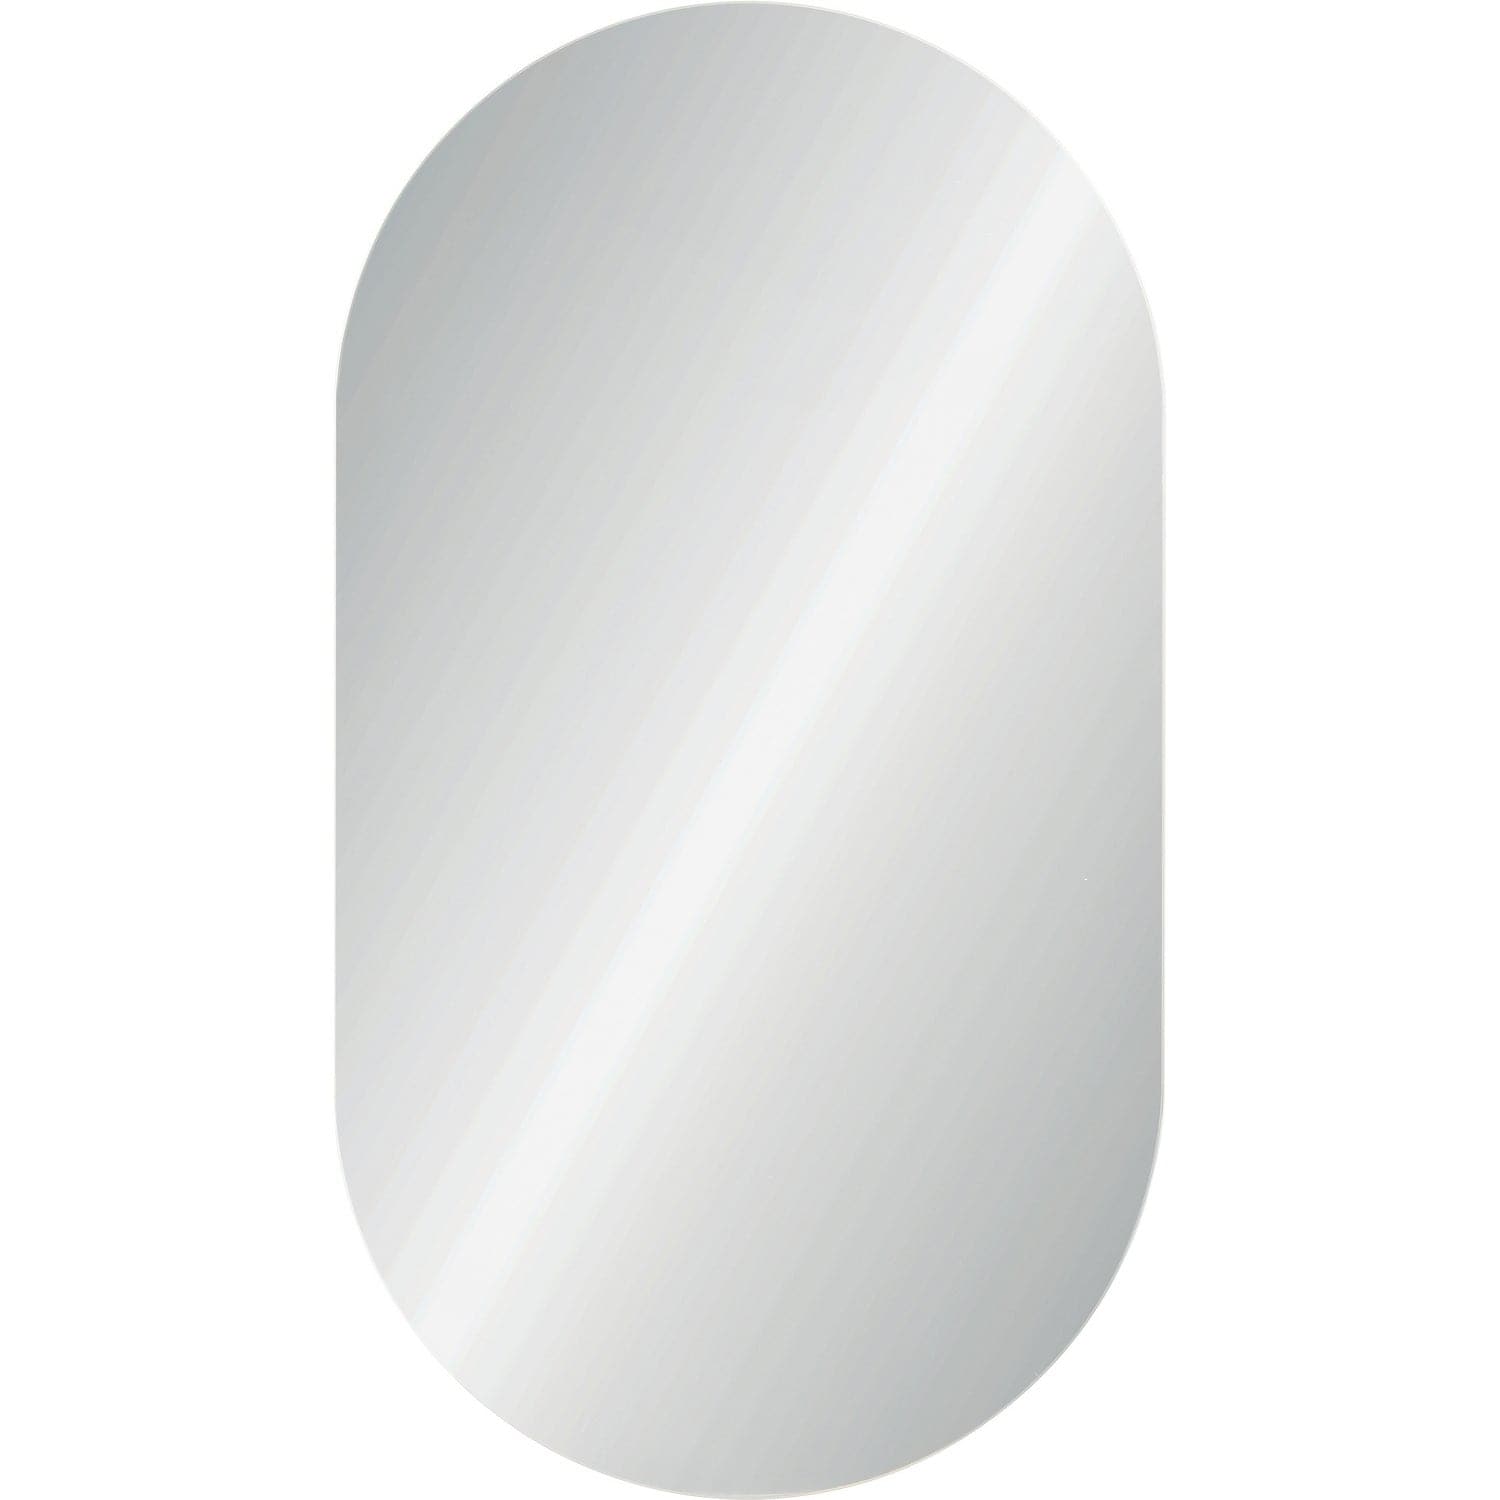 Renwil - MT2412 - LED Mirror - Kato - Clear